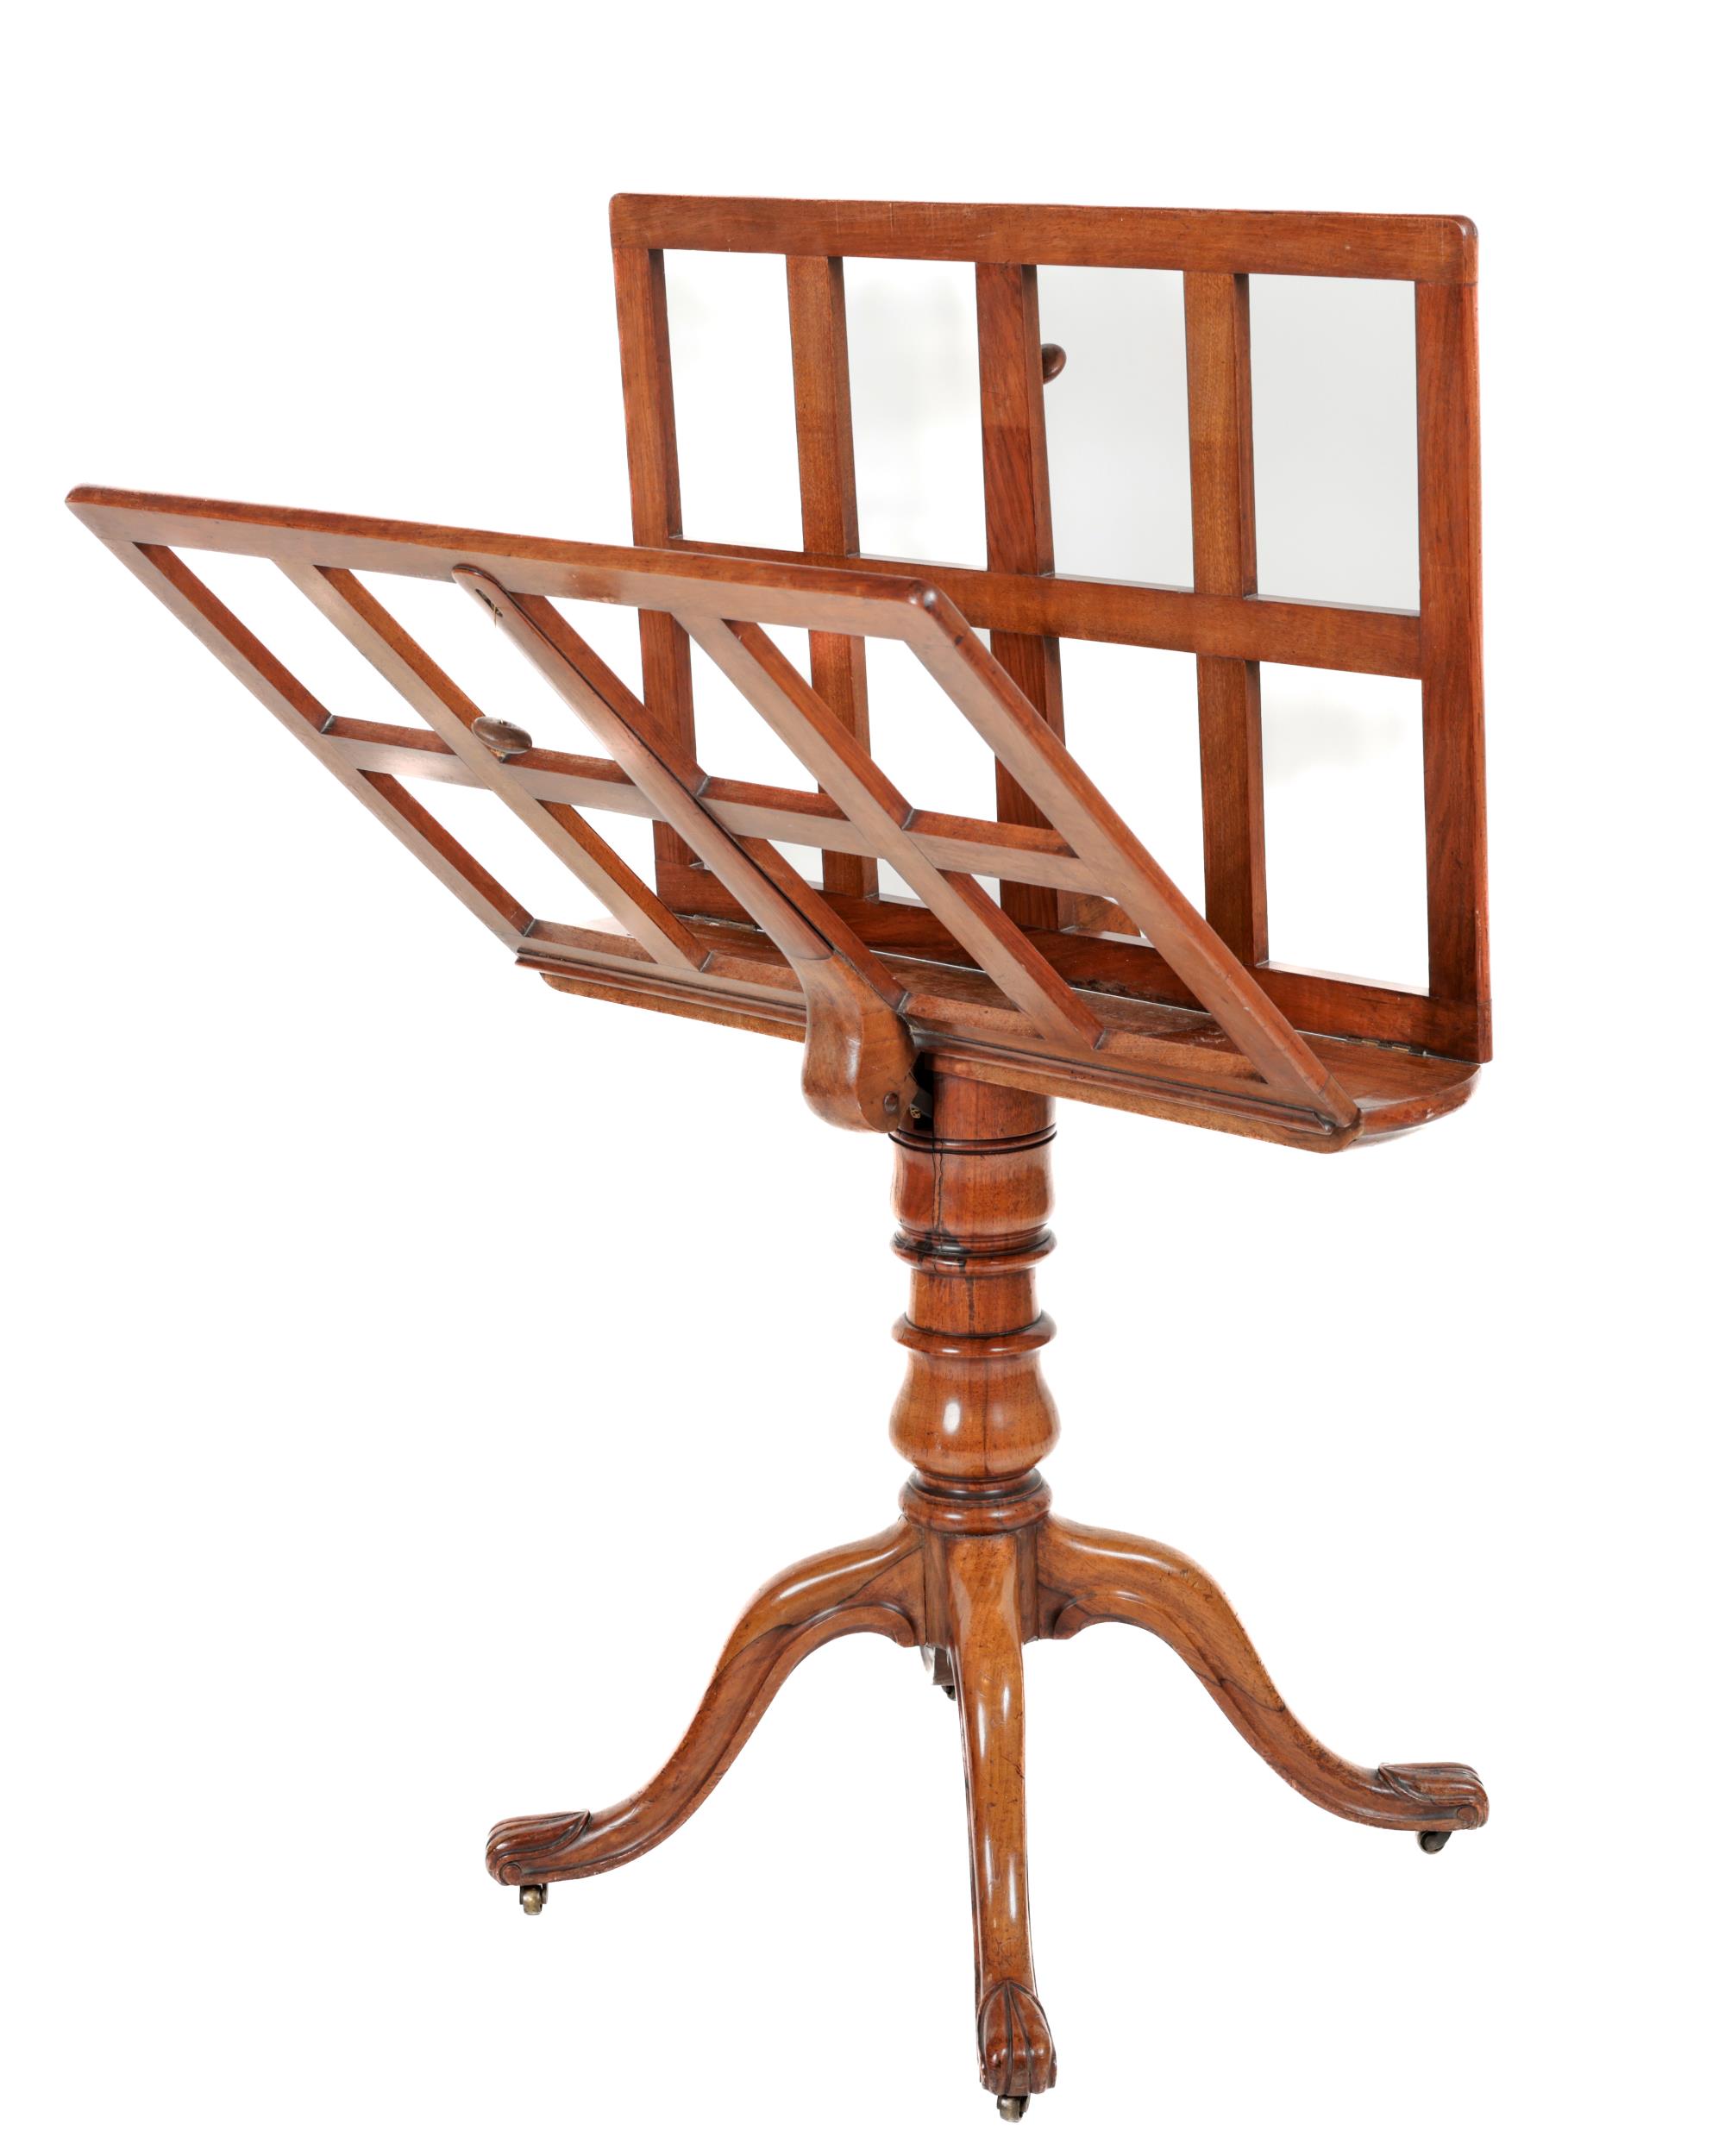 A fine quality William IV mahogany framed Portfolio Stand, with trestle type sides, with opening